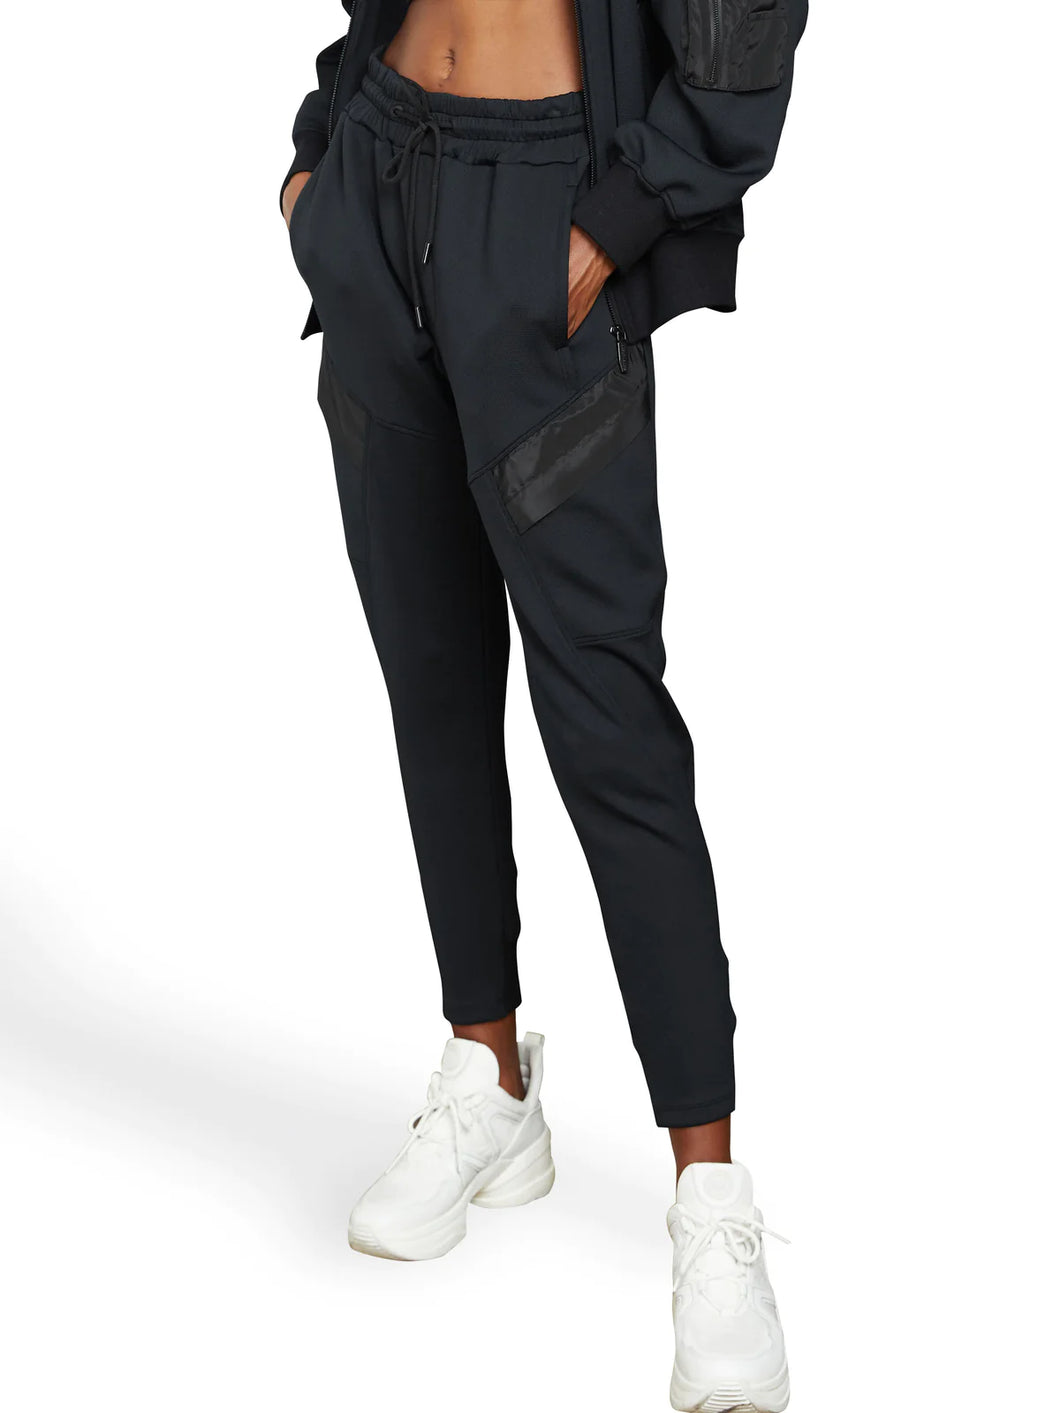 Spacer tapered pants